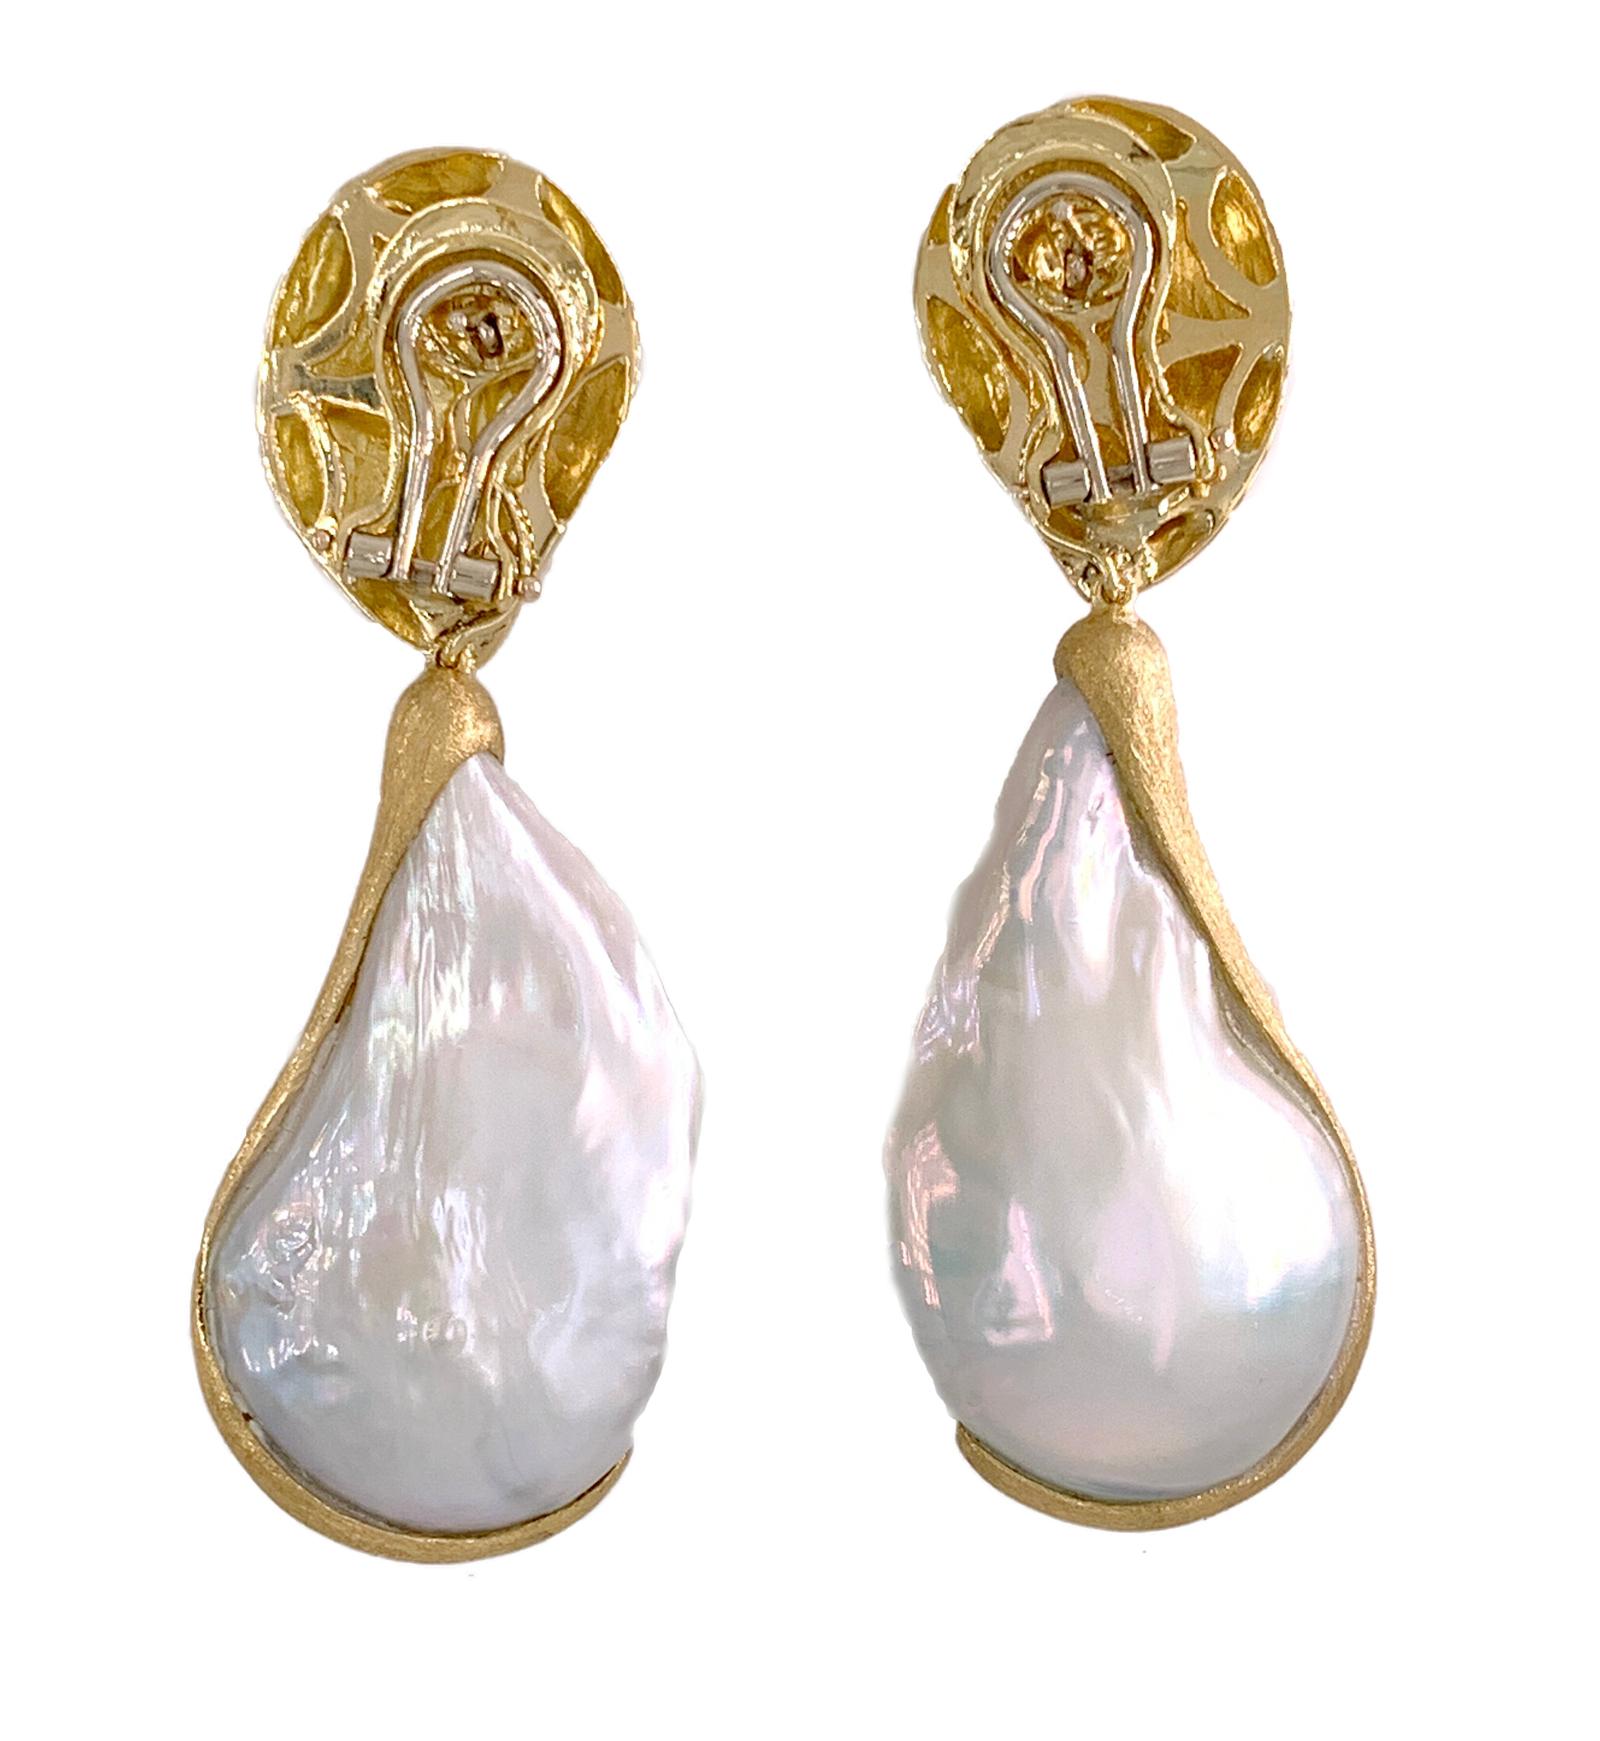 Yvel's signature, handmade 18k yellow Gold, Satin-finish Earrings feature removable Pearl Drops
SIgnificant, Large Baroque Pearls are approximately 44mm x 26mm.
Post backs with French clips.
Stamped 750, and YVEL hallmark